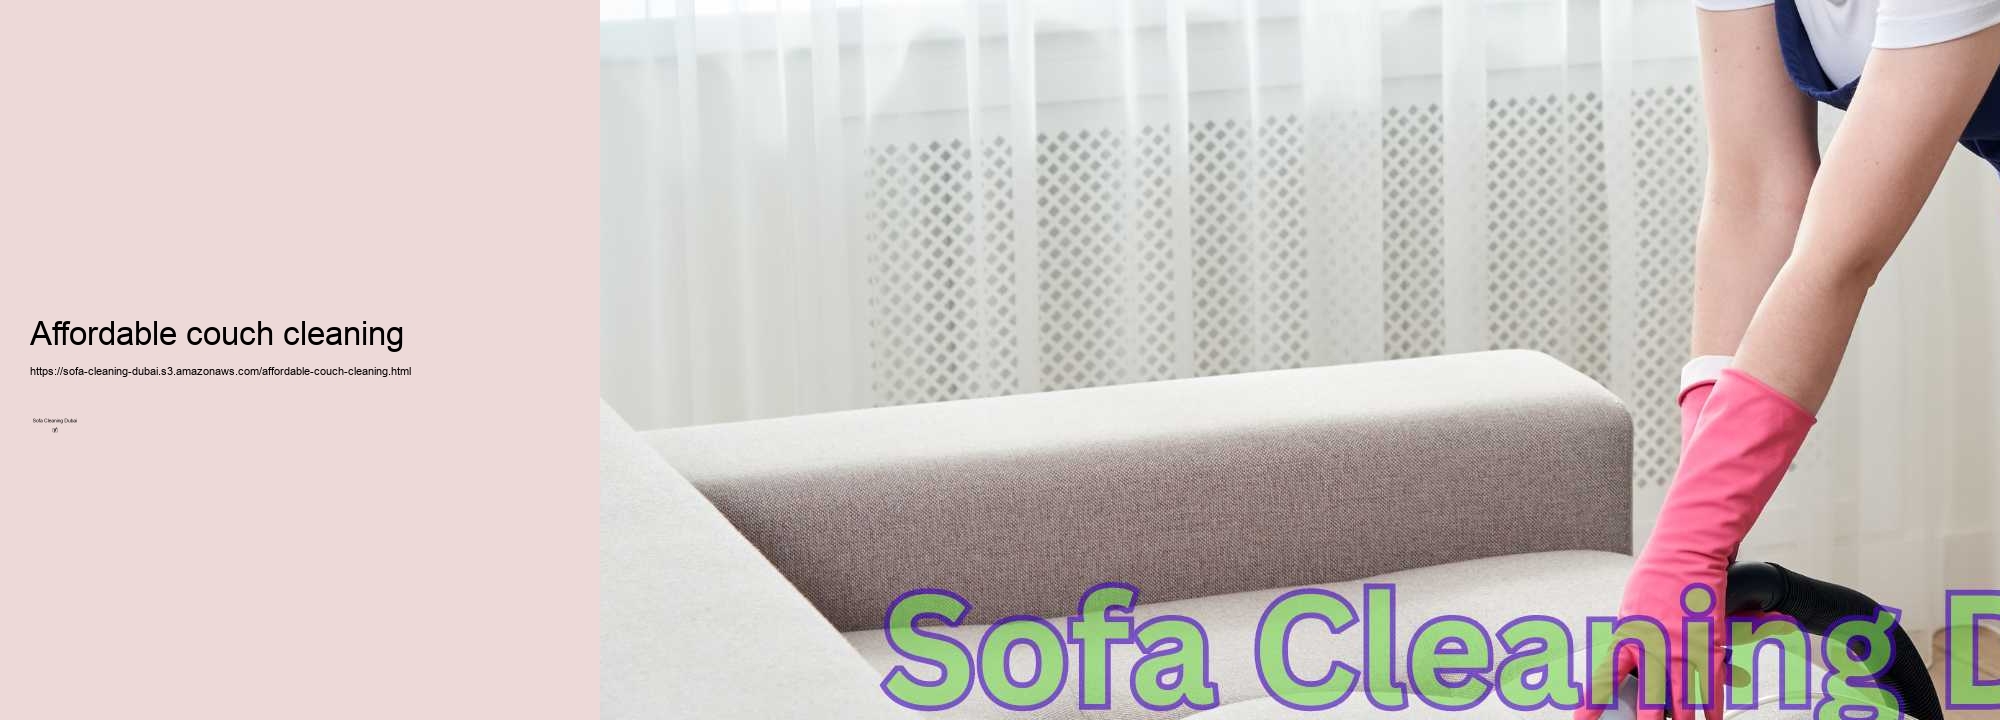 Affordable couch cleaning